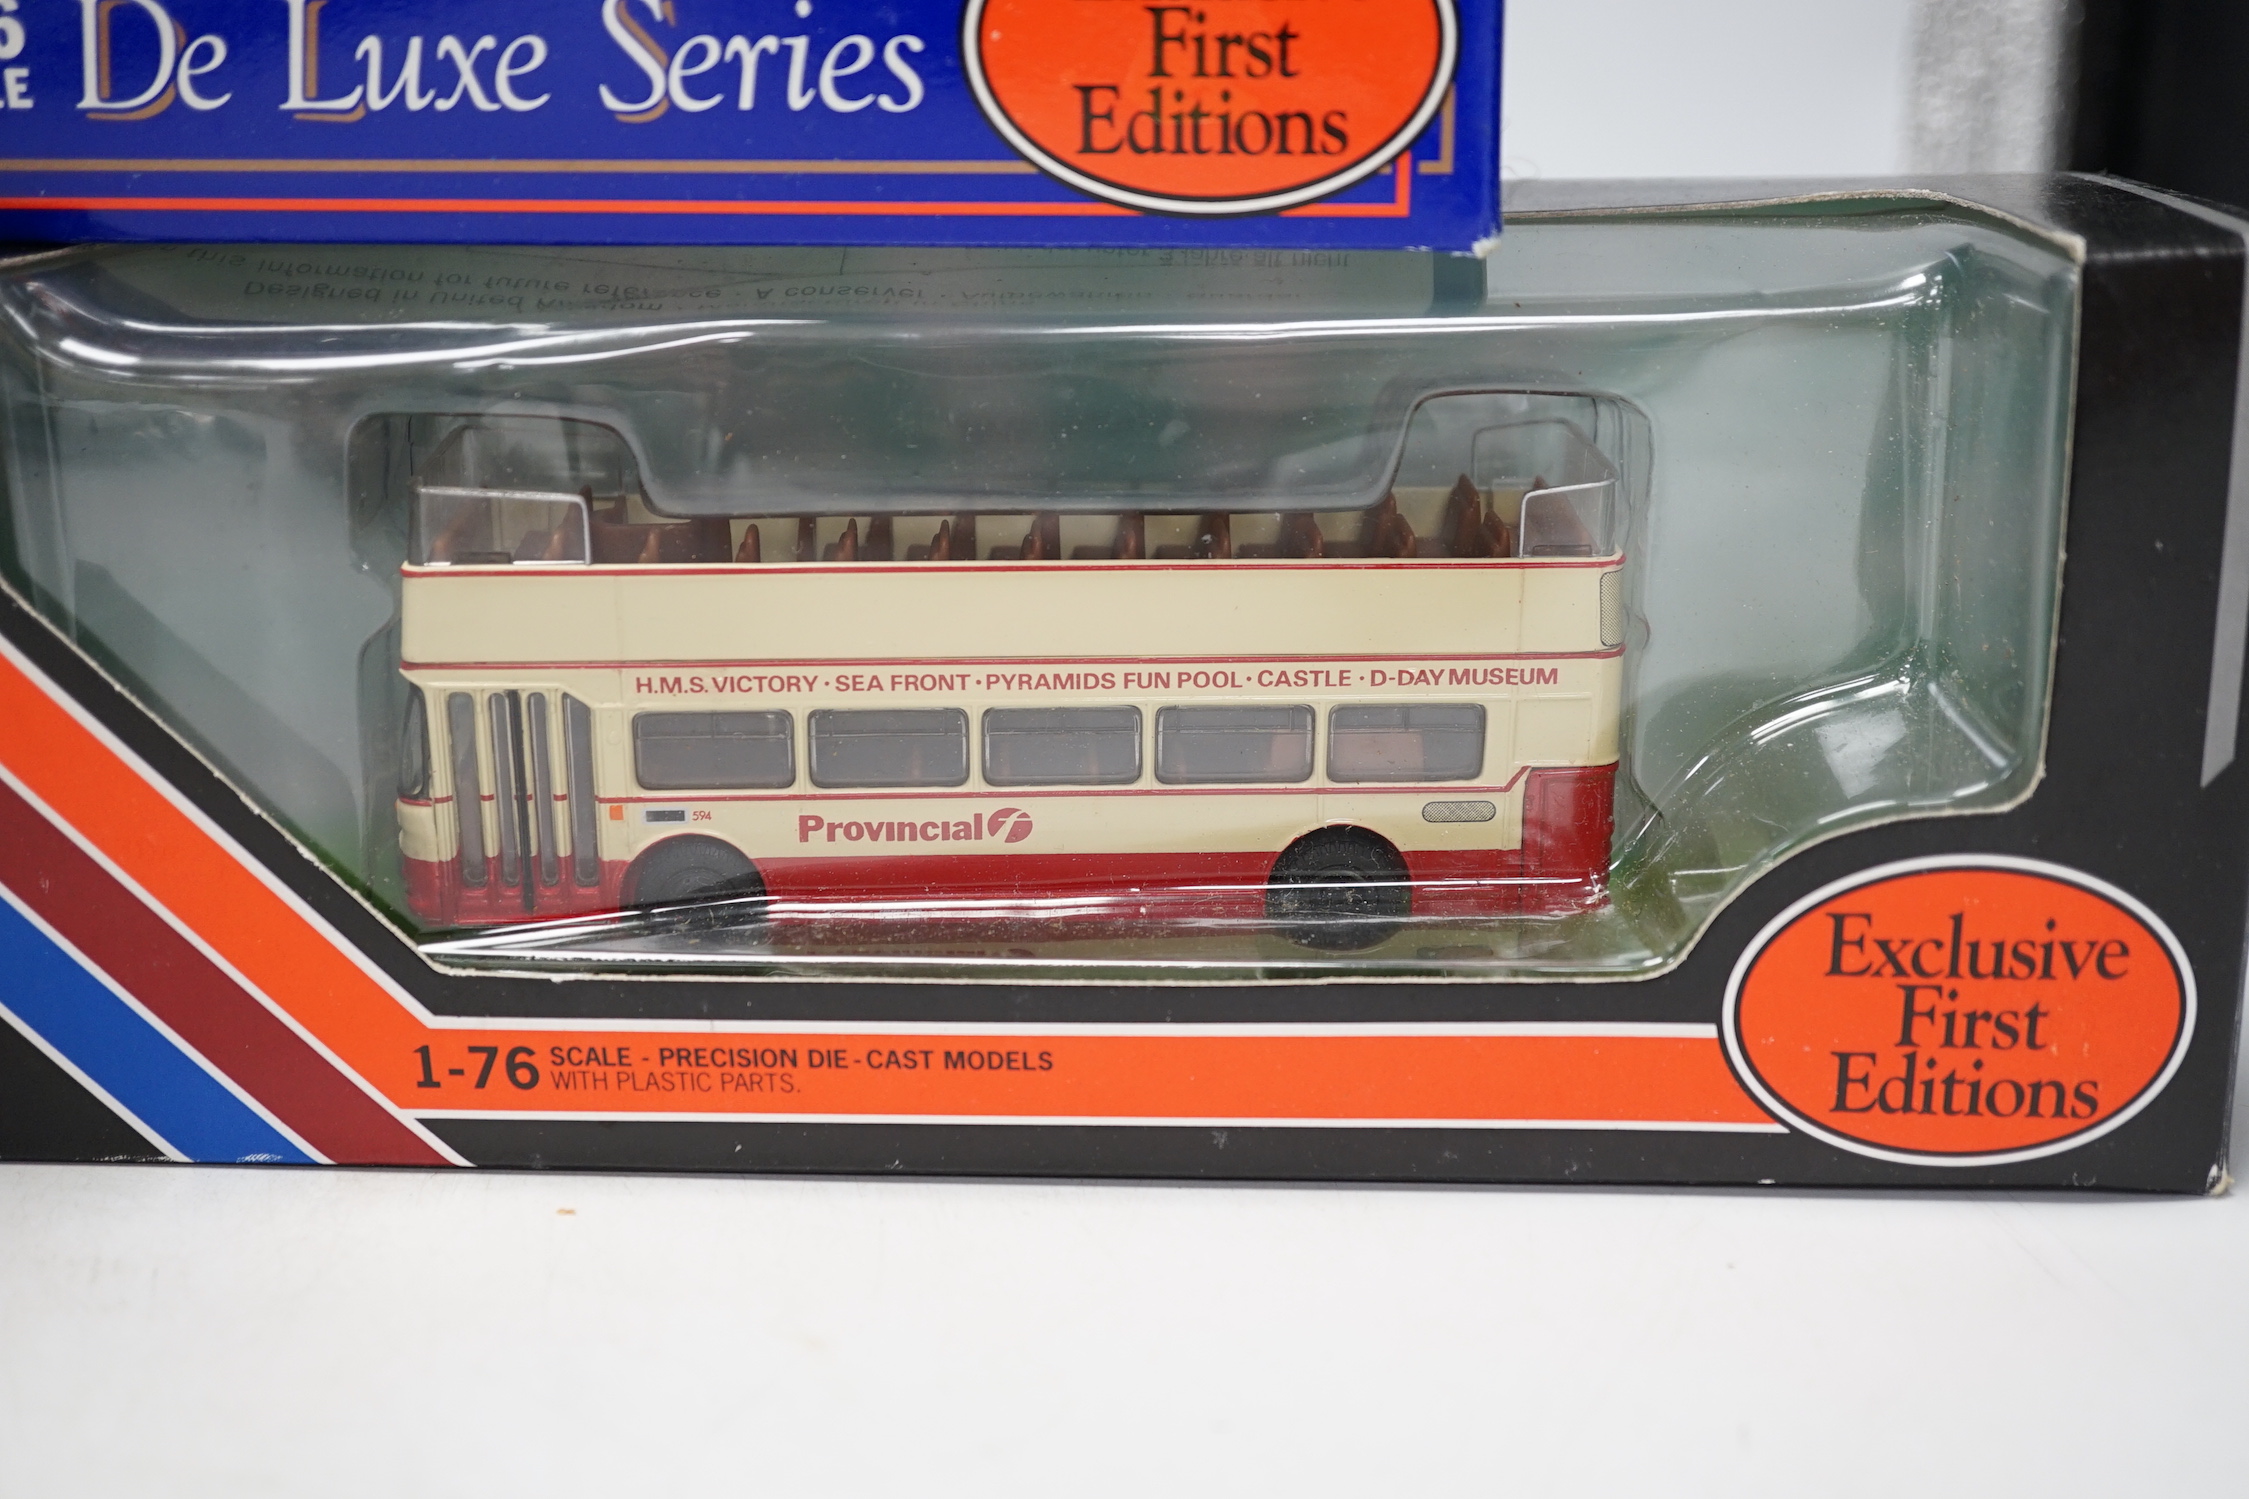 Thirty-three boxed EFE and Corgi OOC buses and coaches, operators include; London Transport, Southdown, Glasgow Corporation, Maidstone & District, etc.